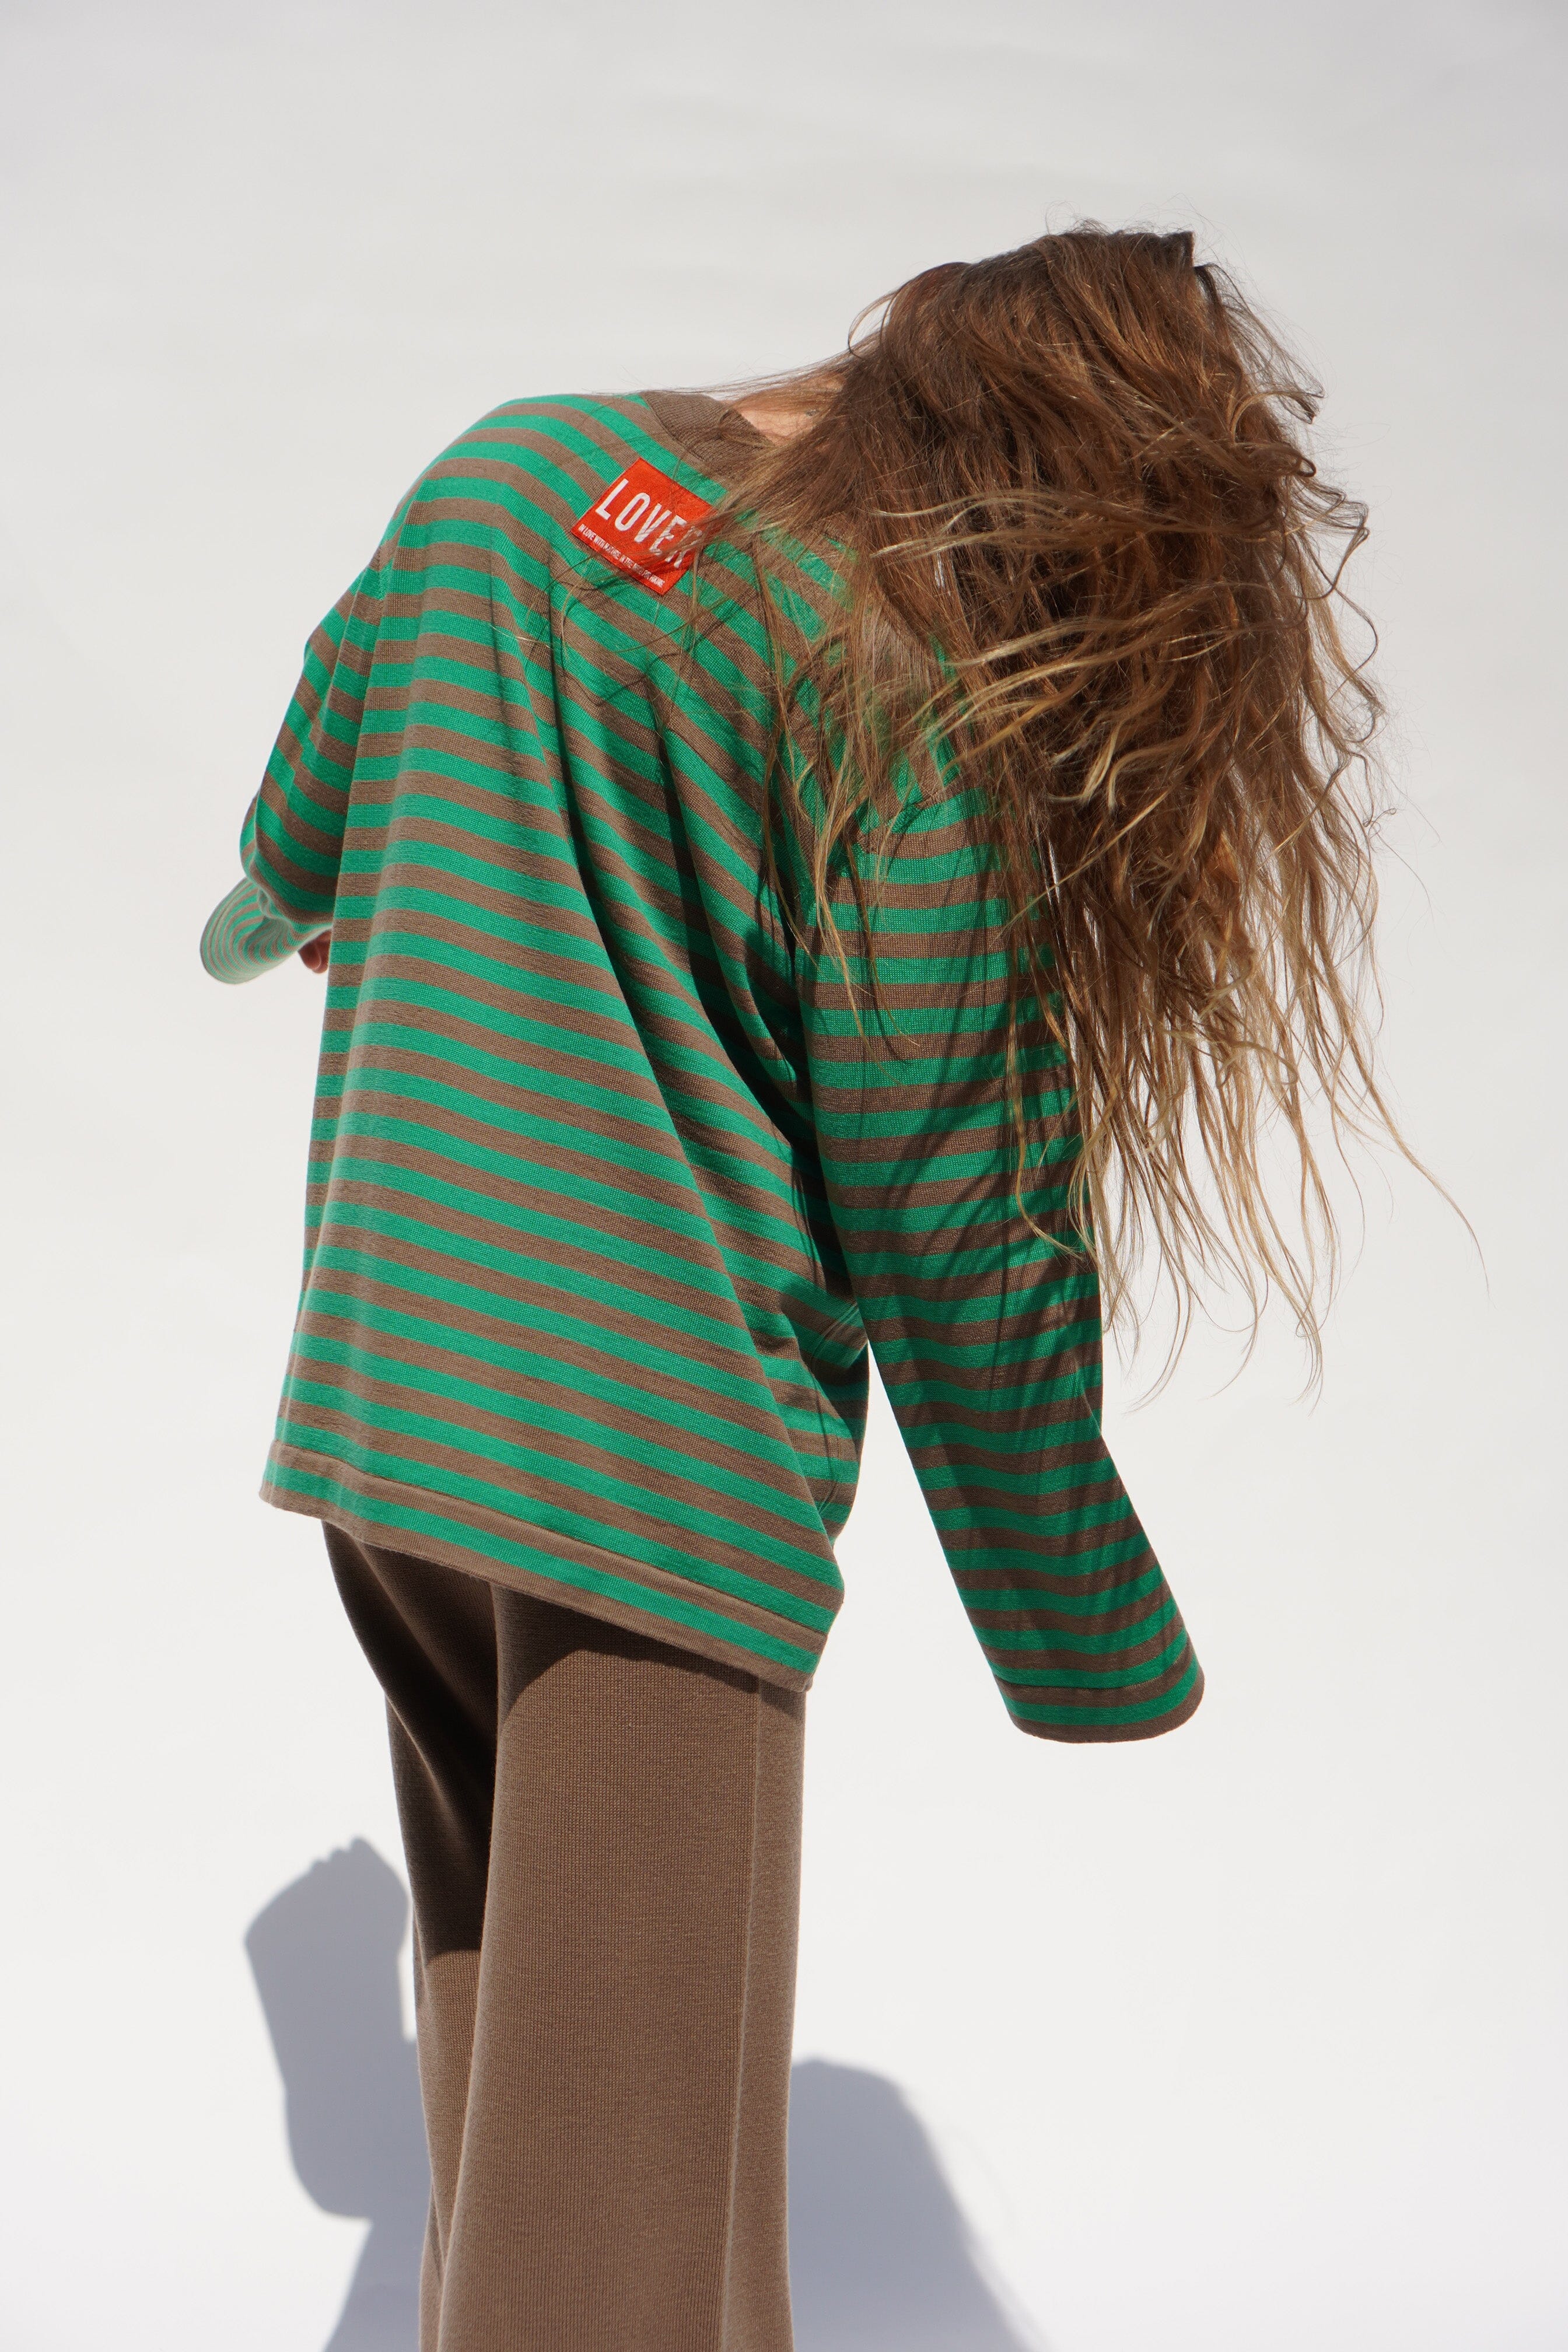 TRUFFLE/ELECTRIC GREEN EXTRA FINE MERINO WOOL SHIRT for lovers and trees 